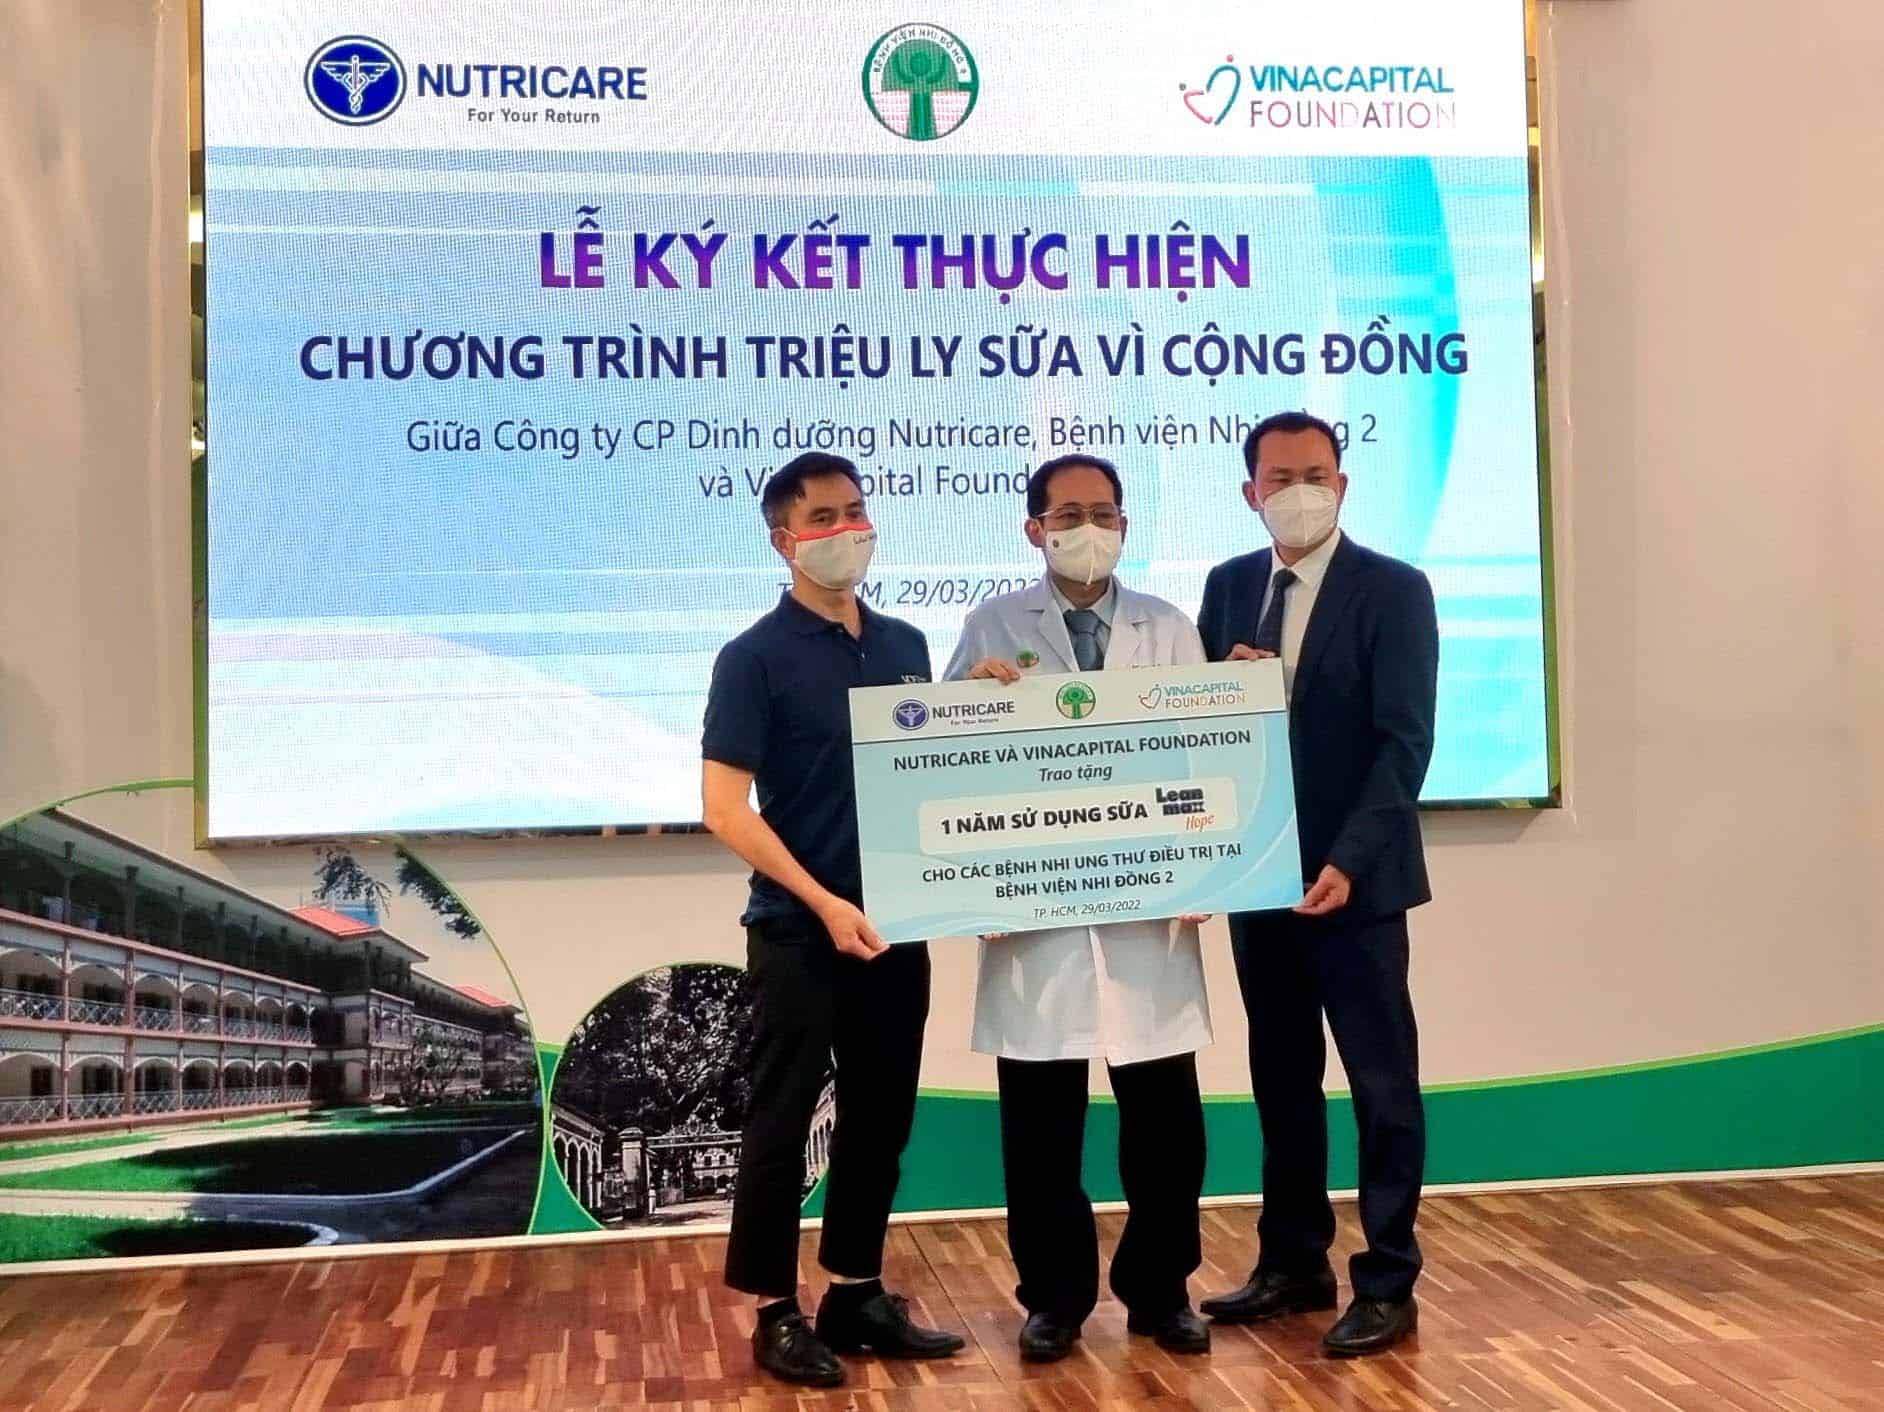 Implement the "Millions of glasses of milk for community" program in Vietnam National Children's Hospital and Ho Chi Minh City Children's Hospital 2 to support pediatric patients with cancer